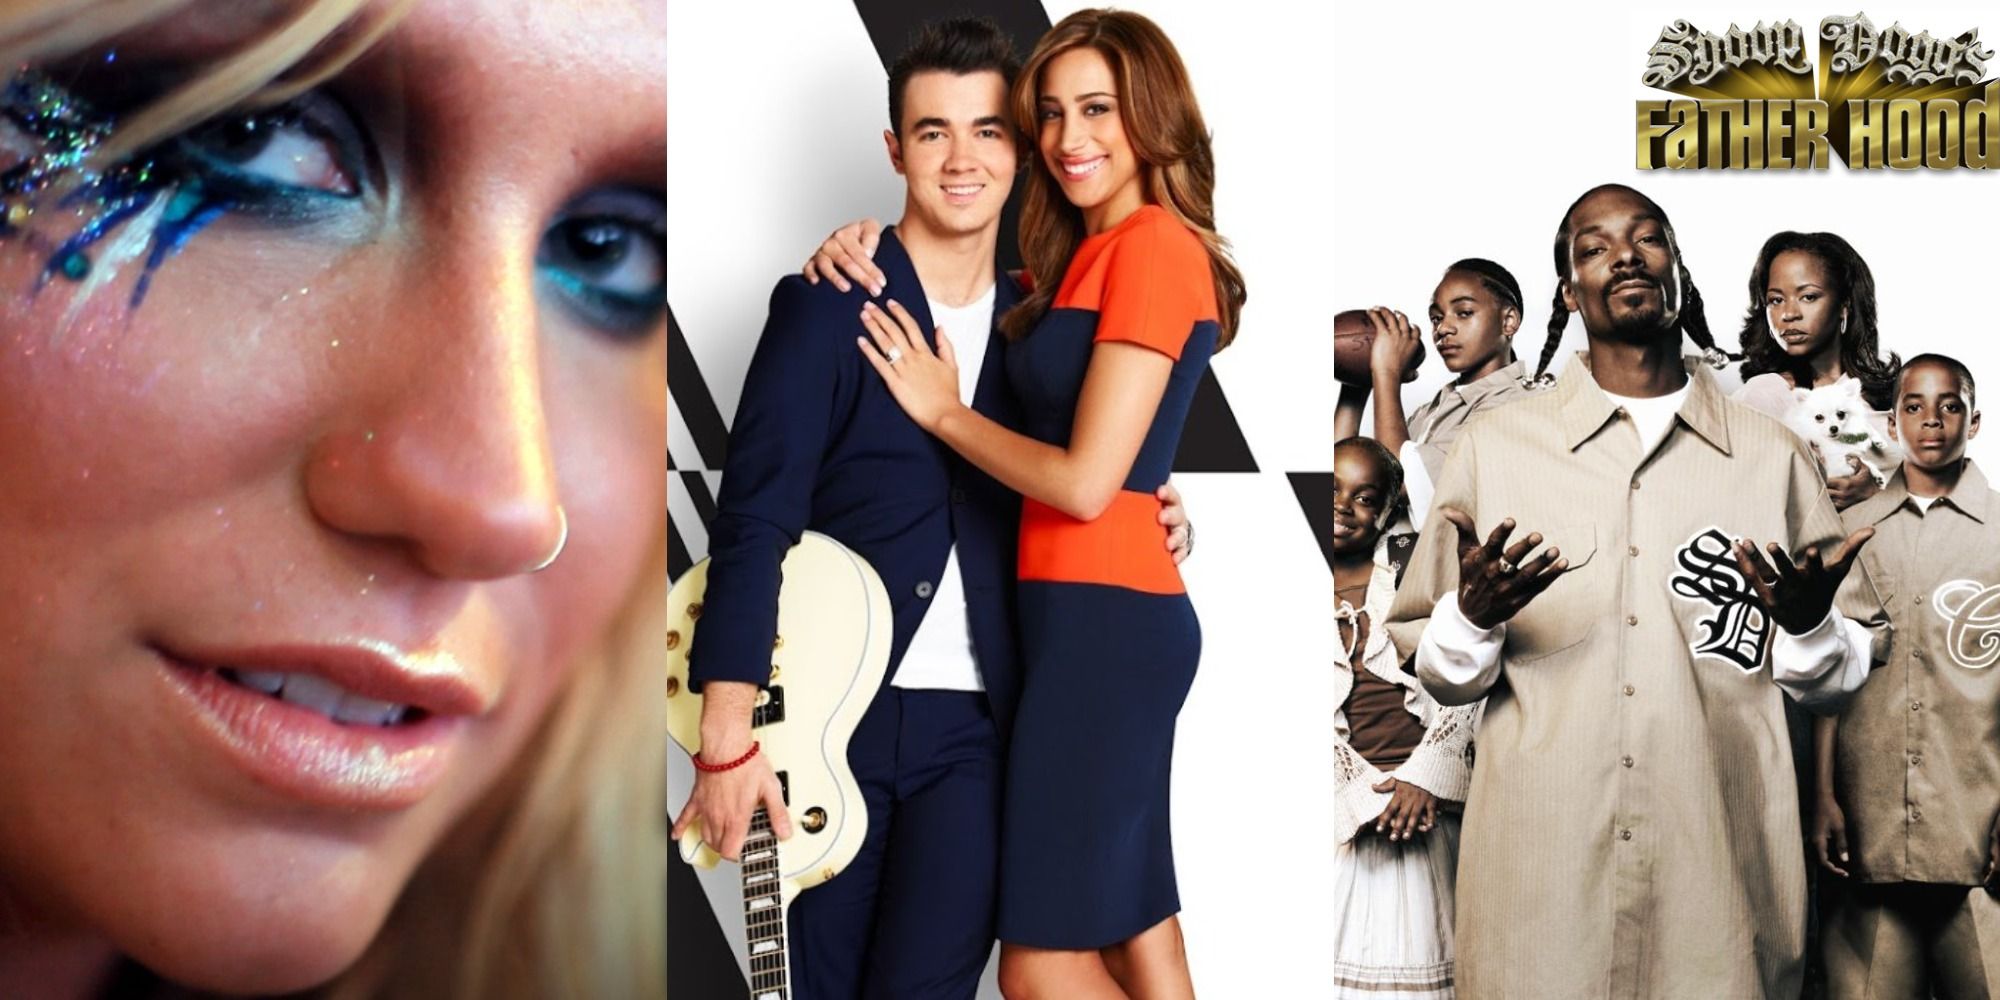 A trio of reality shows featuring the lives of musicians such as Kesha, Nick Jonas, and Snoop Dogg